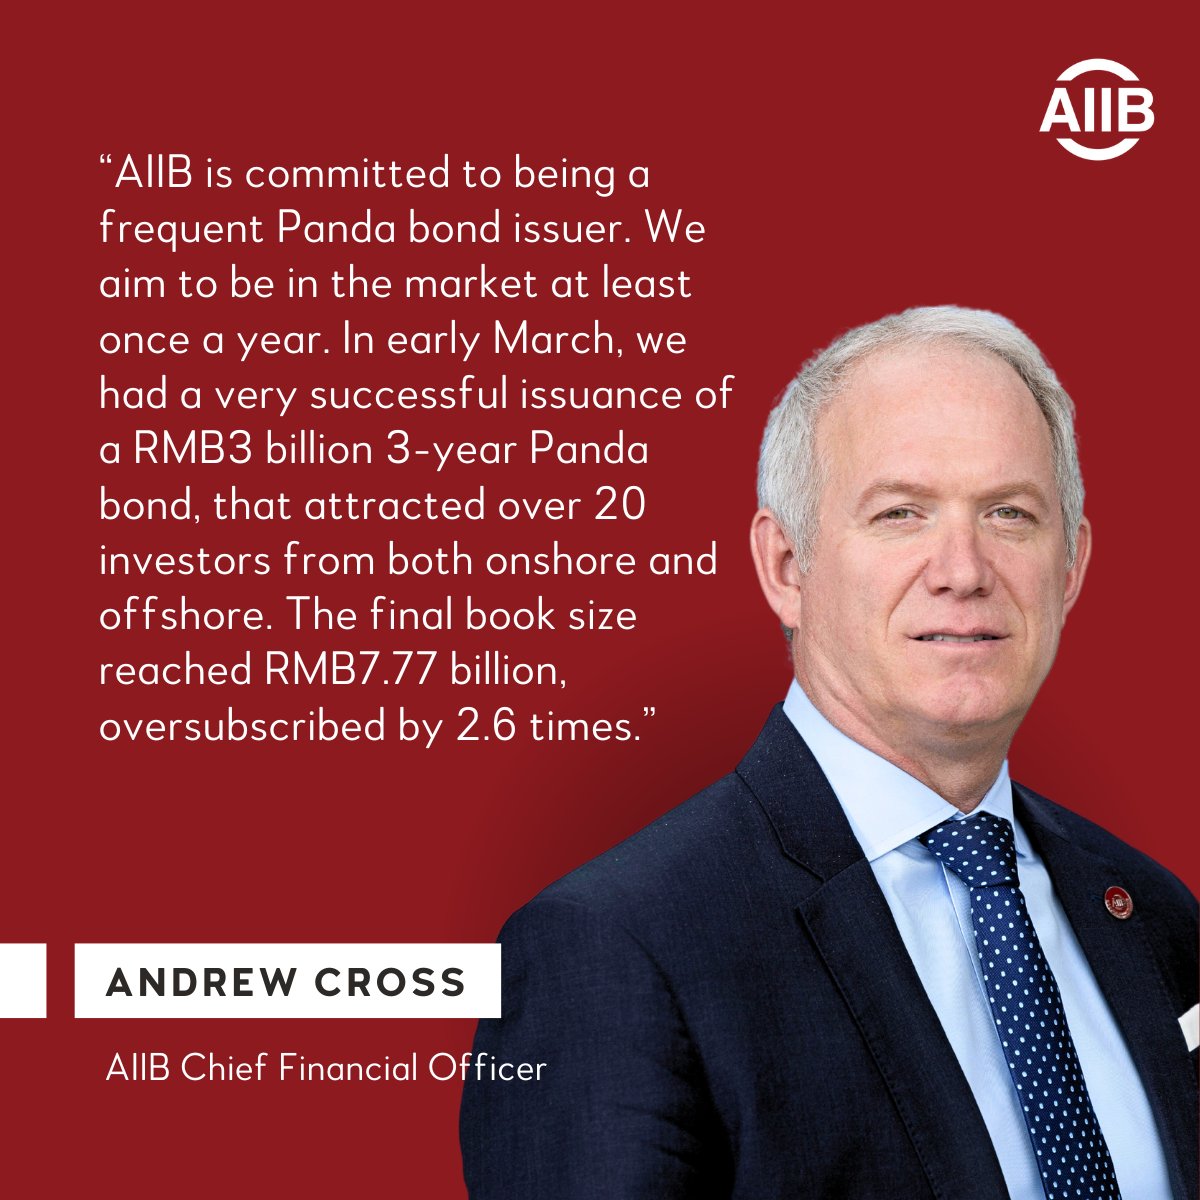 💡#DYK | AIIB has been developing its presence in the onshore RMB bond market since 2020 and, to date, has issued over RMB11 billion in 🐼Panda bonds. 🔗 linkedin.com/posts/asian-in… #AIIBtreasury #pandabond #capitalmarkets